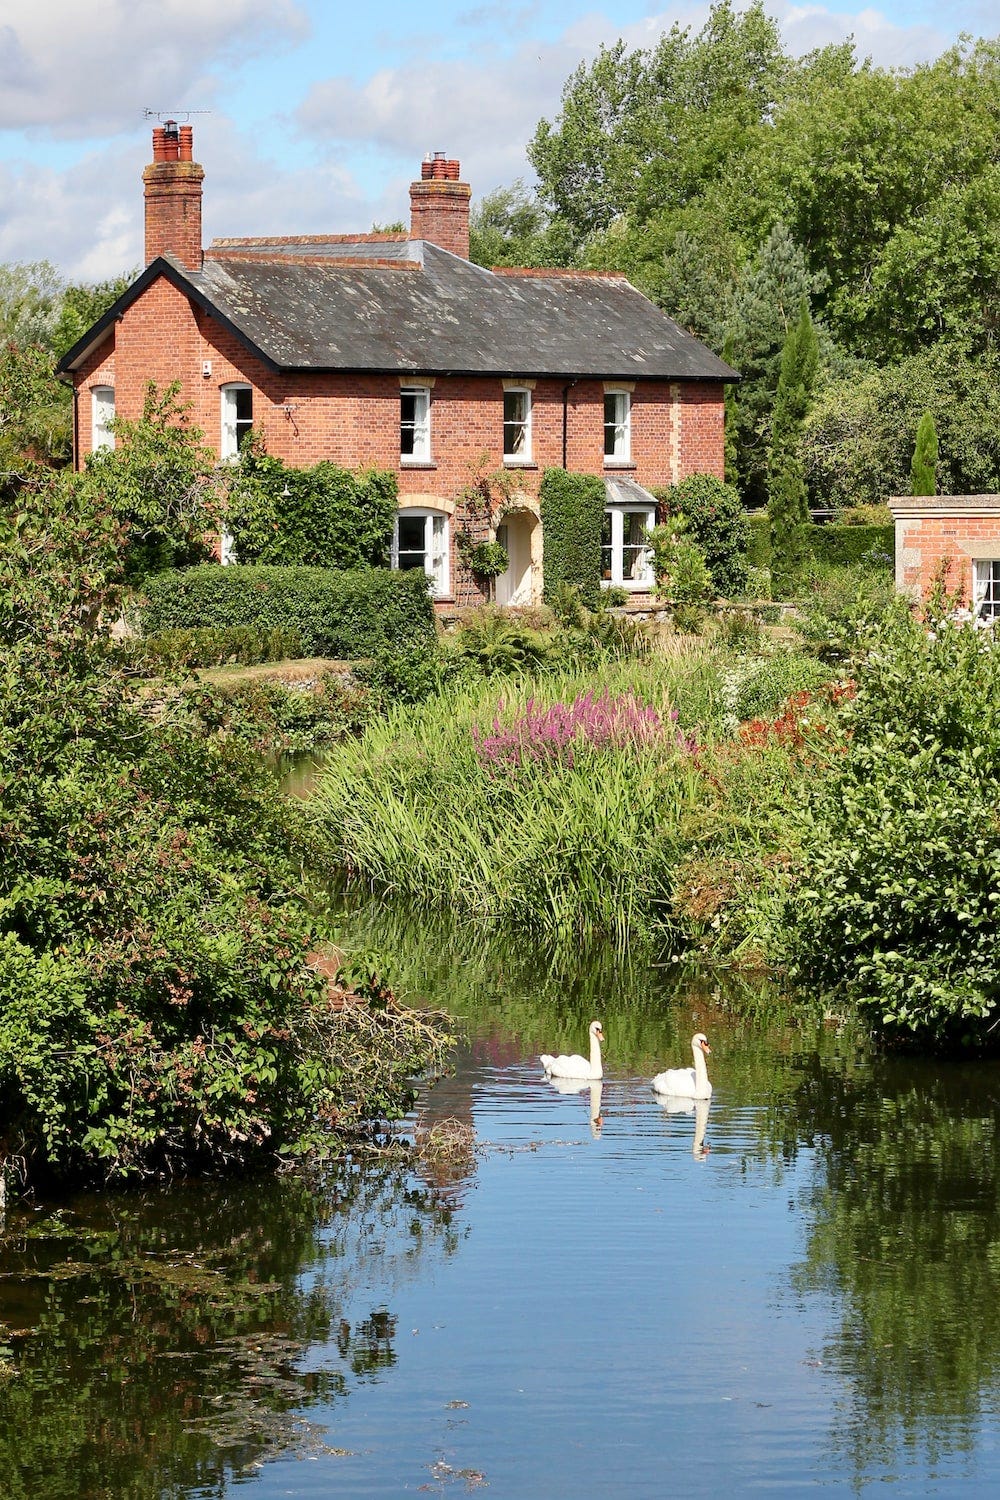 cottage surrounded by greenery and a pond with two swans swimming in it